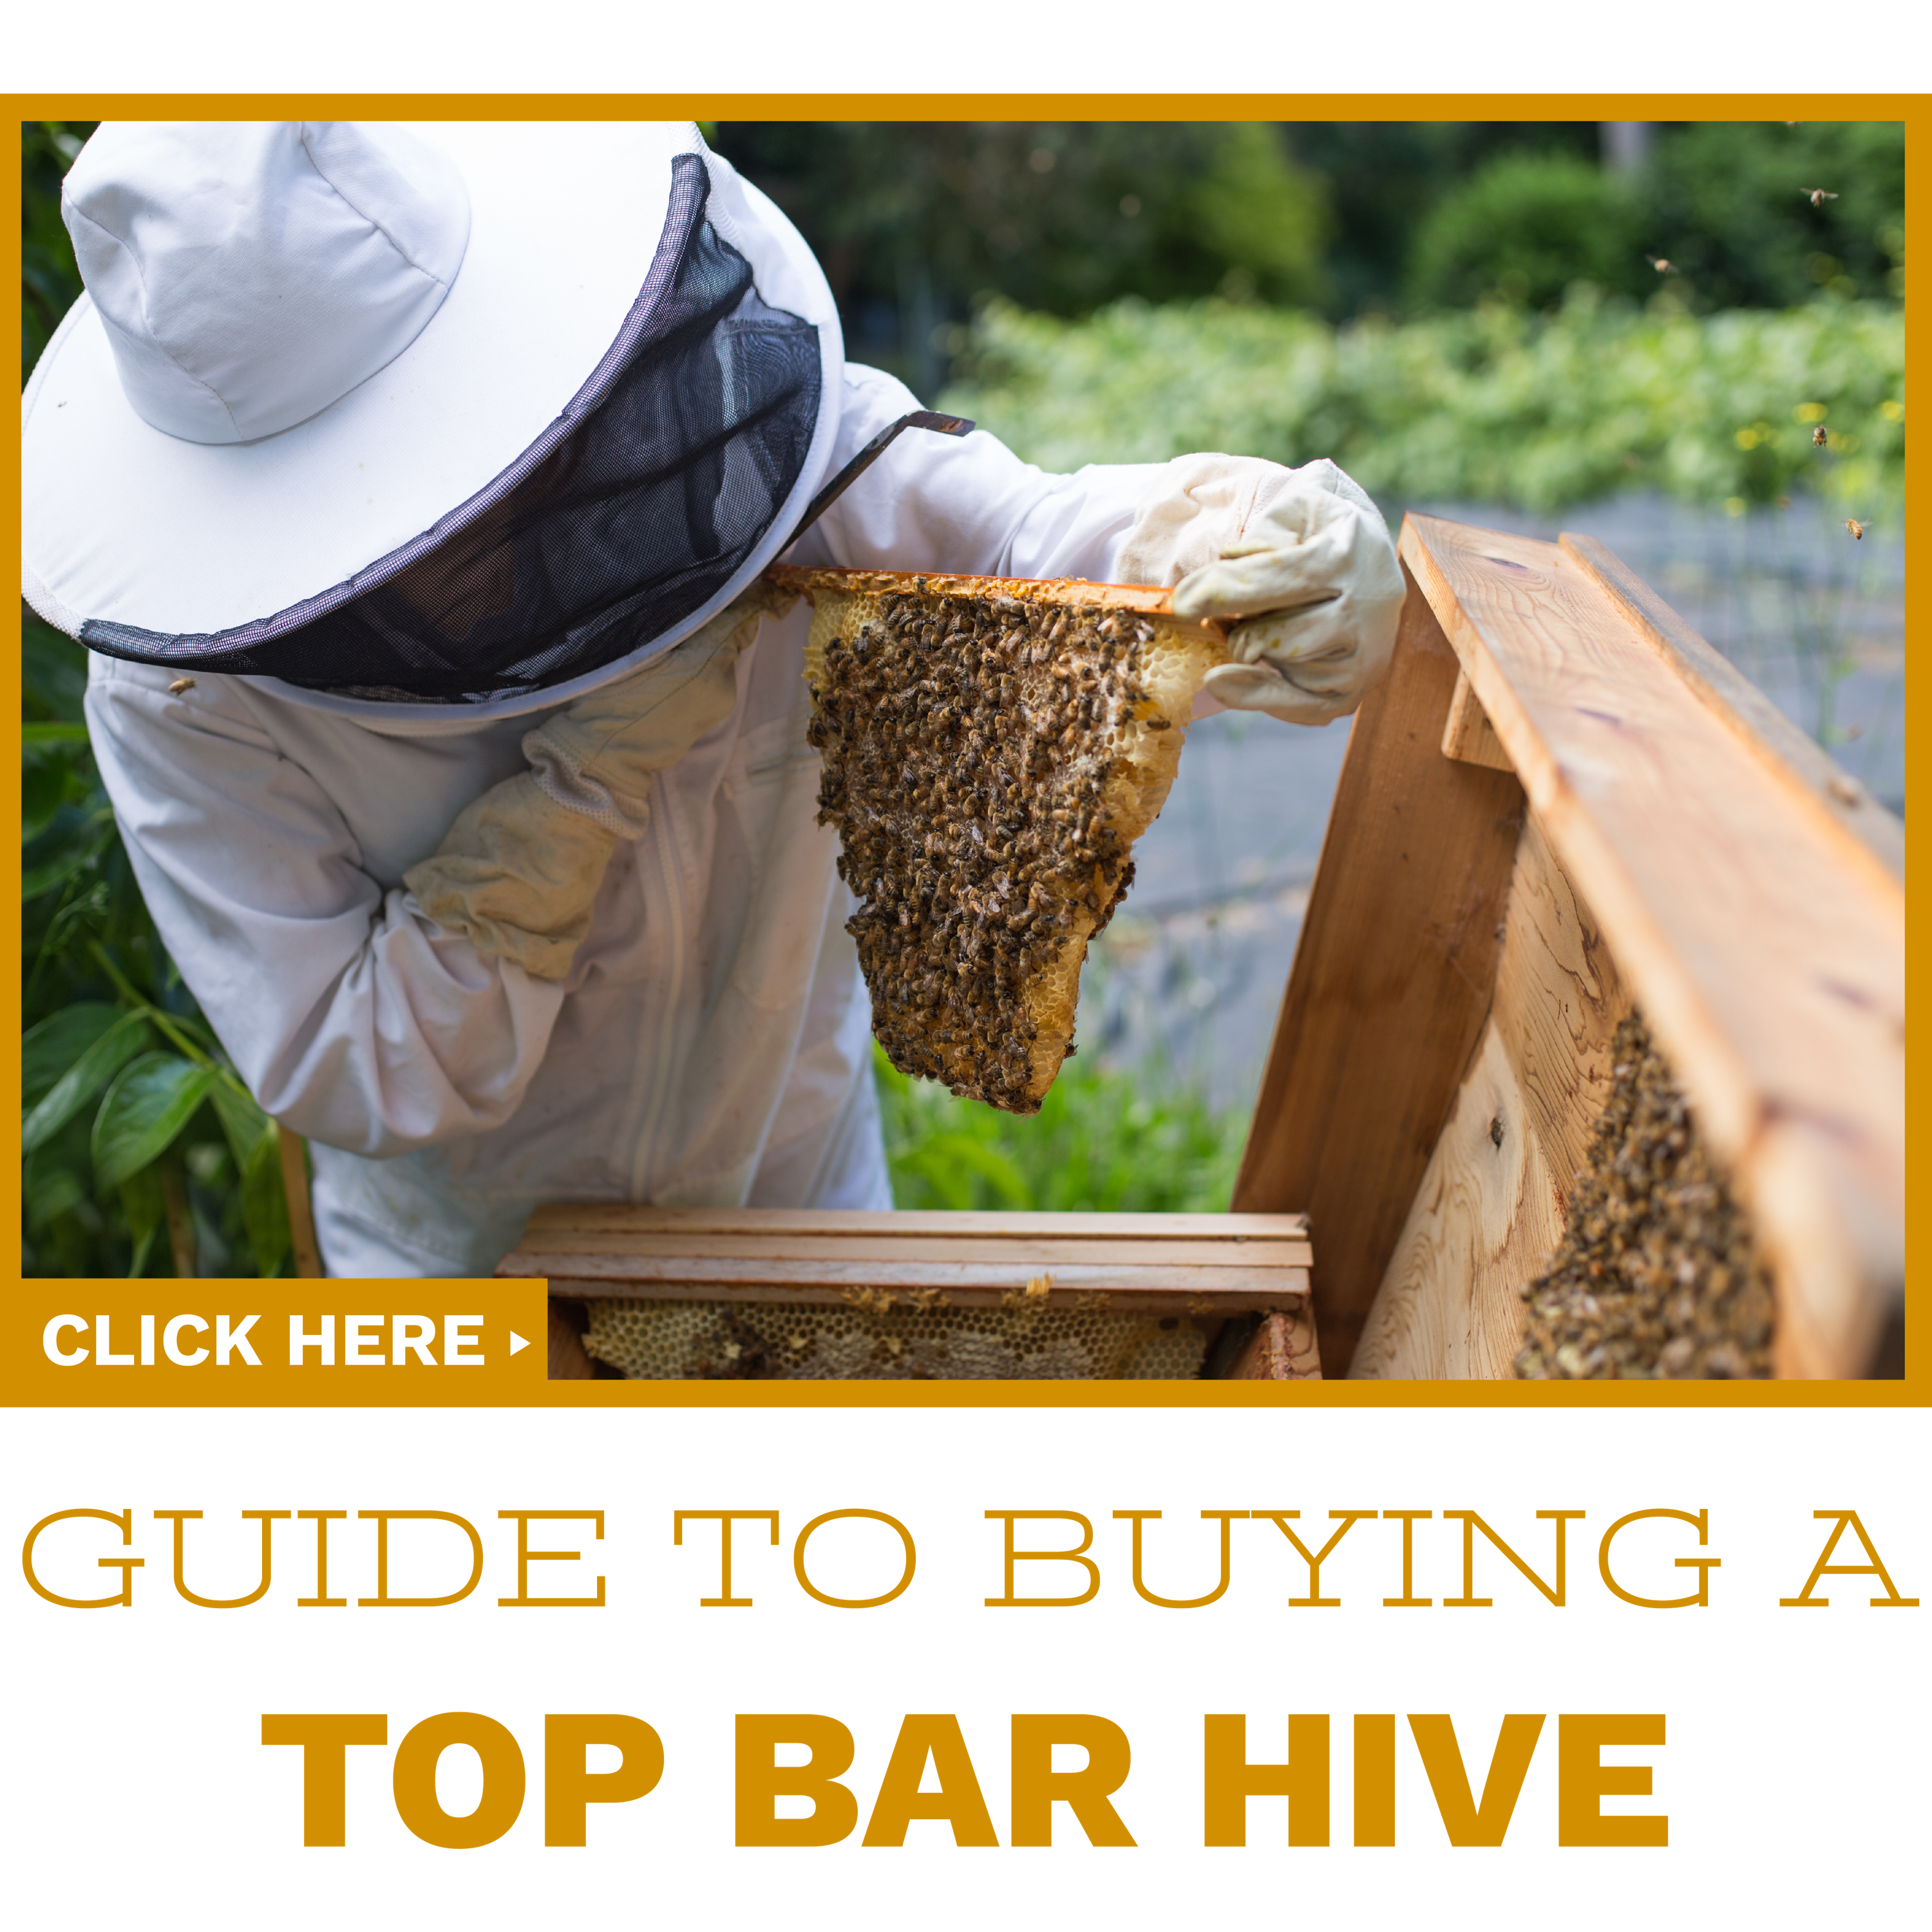 Click to read our guide to buying your first top bar hive